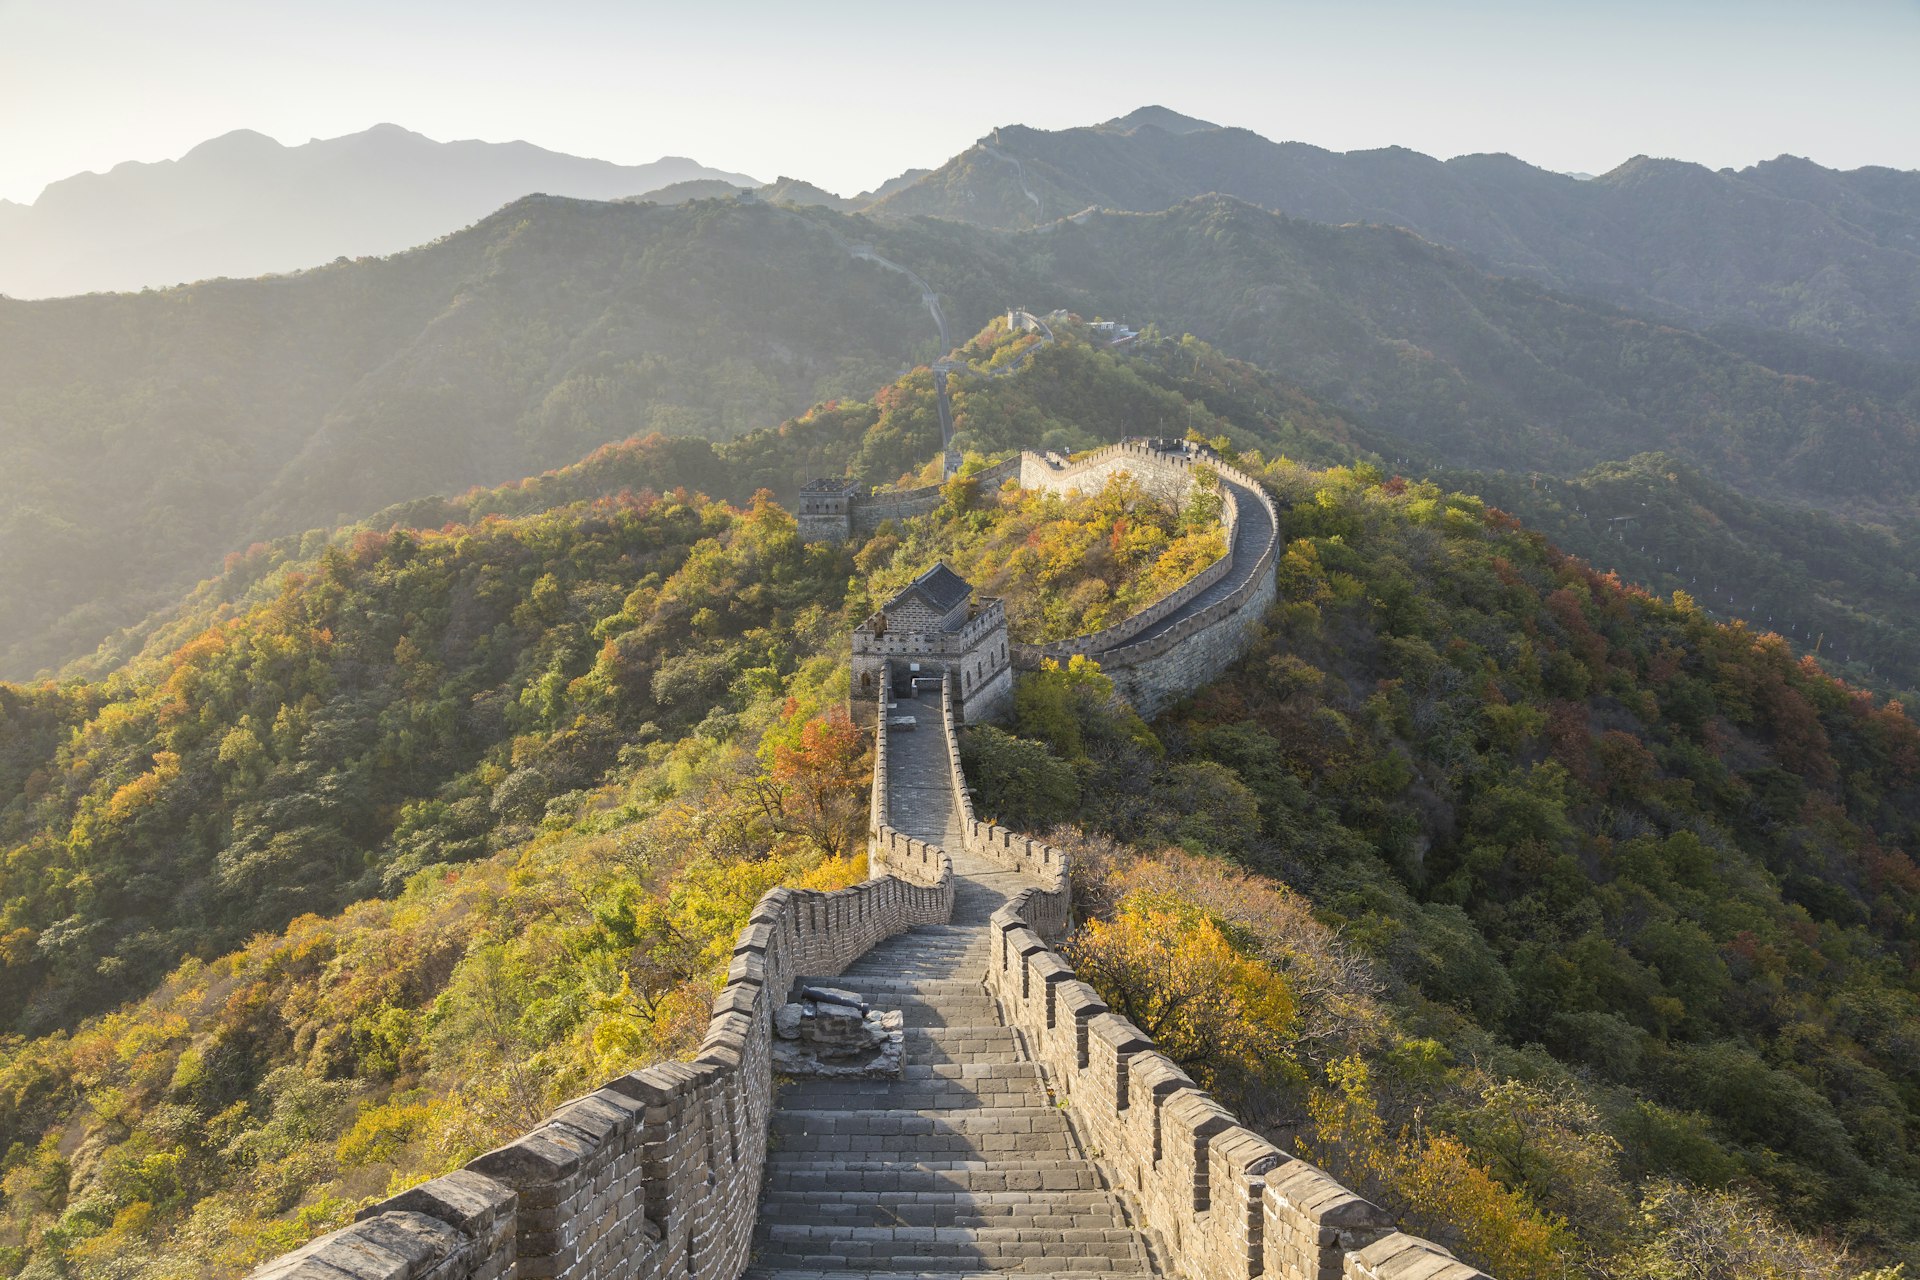 The Great Wall of China at Mutianyu near Beijing in Hebei Province, China